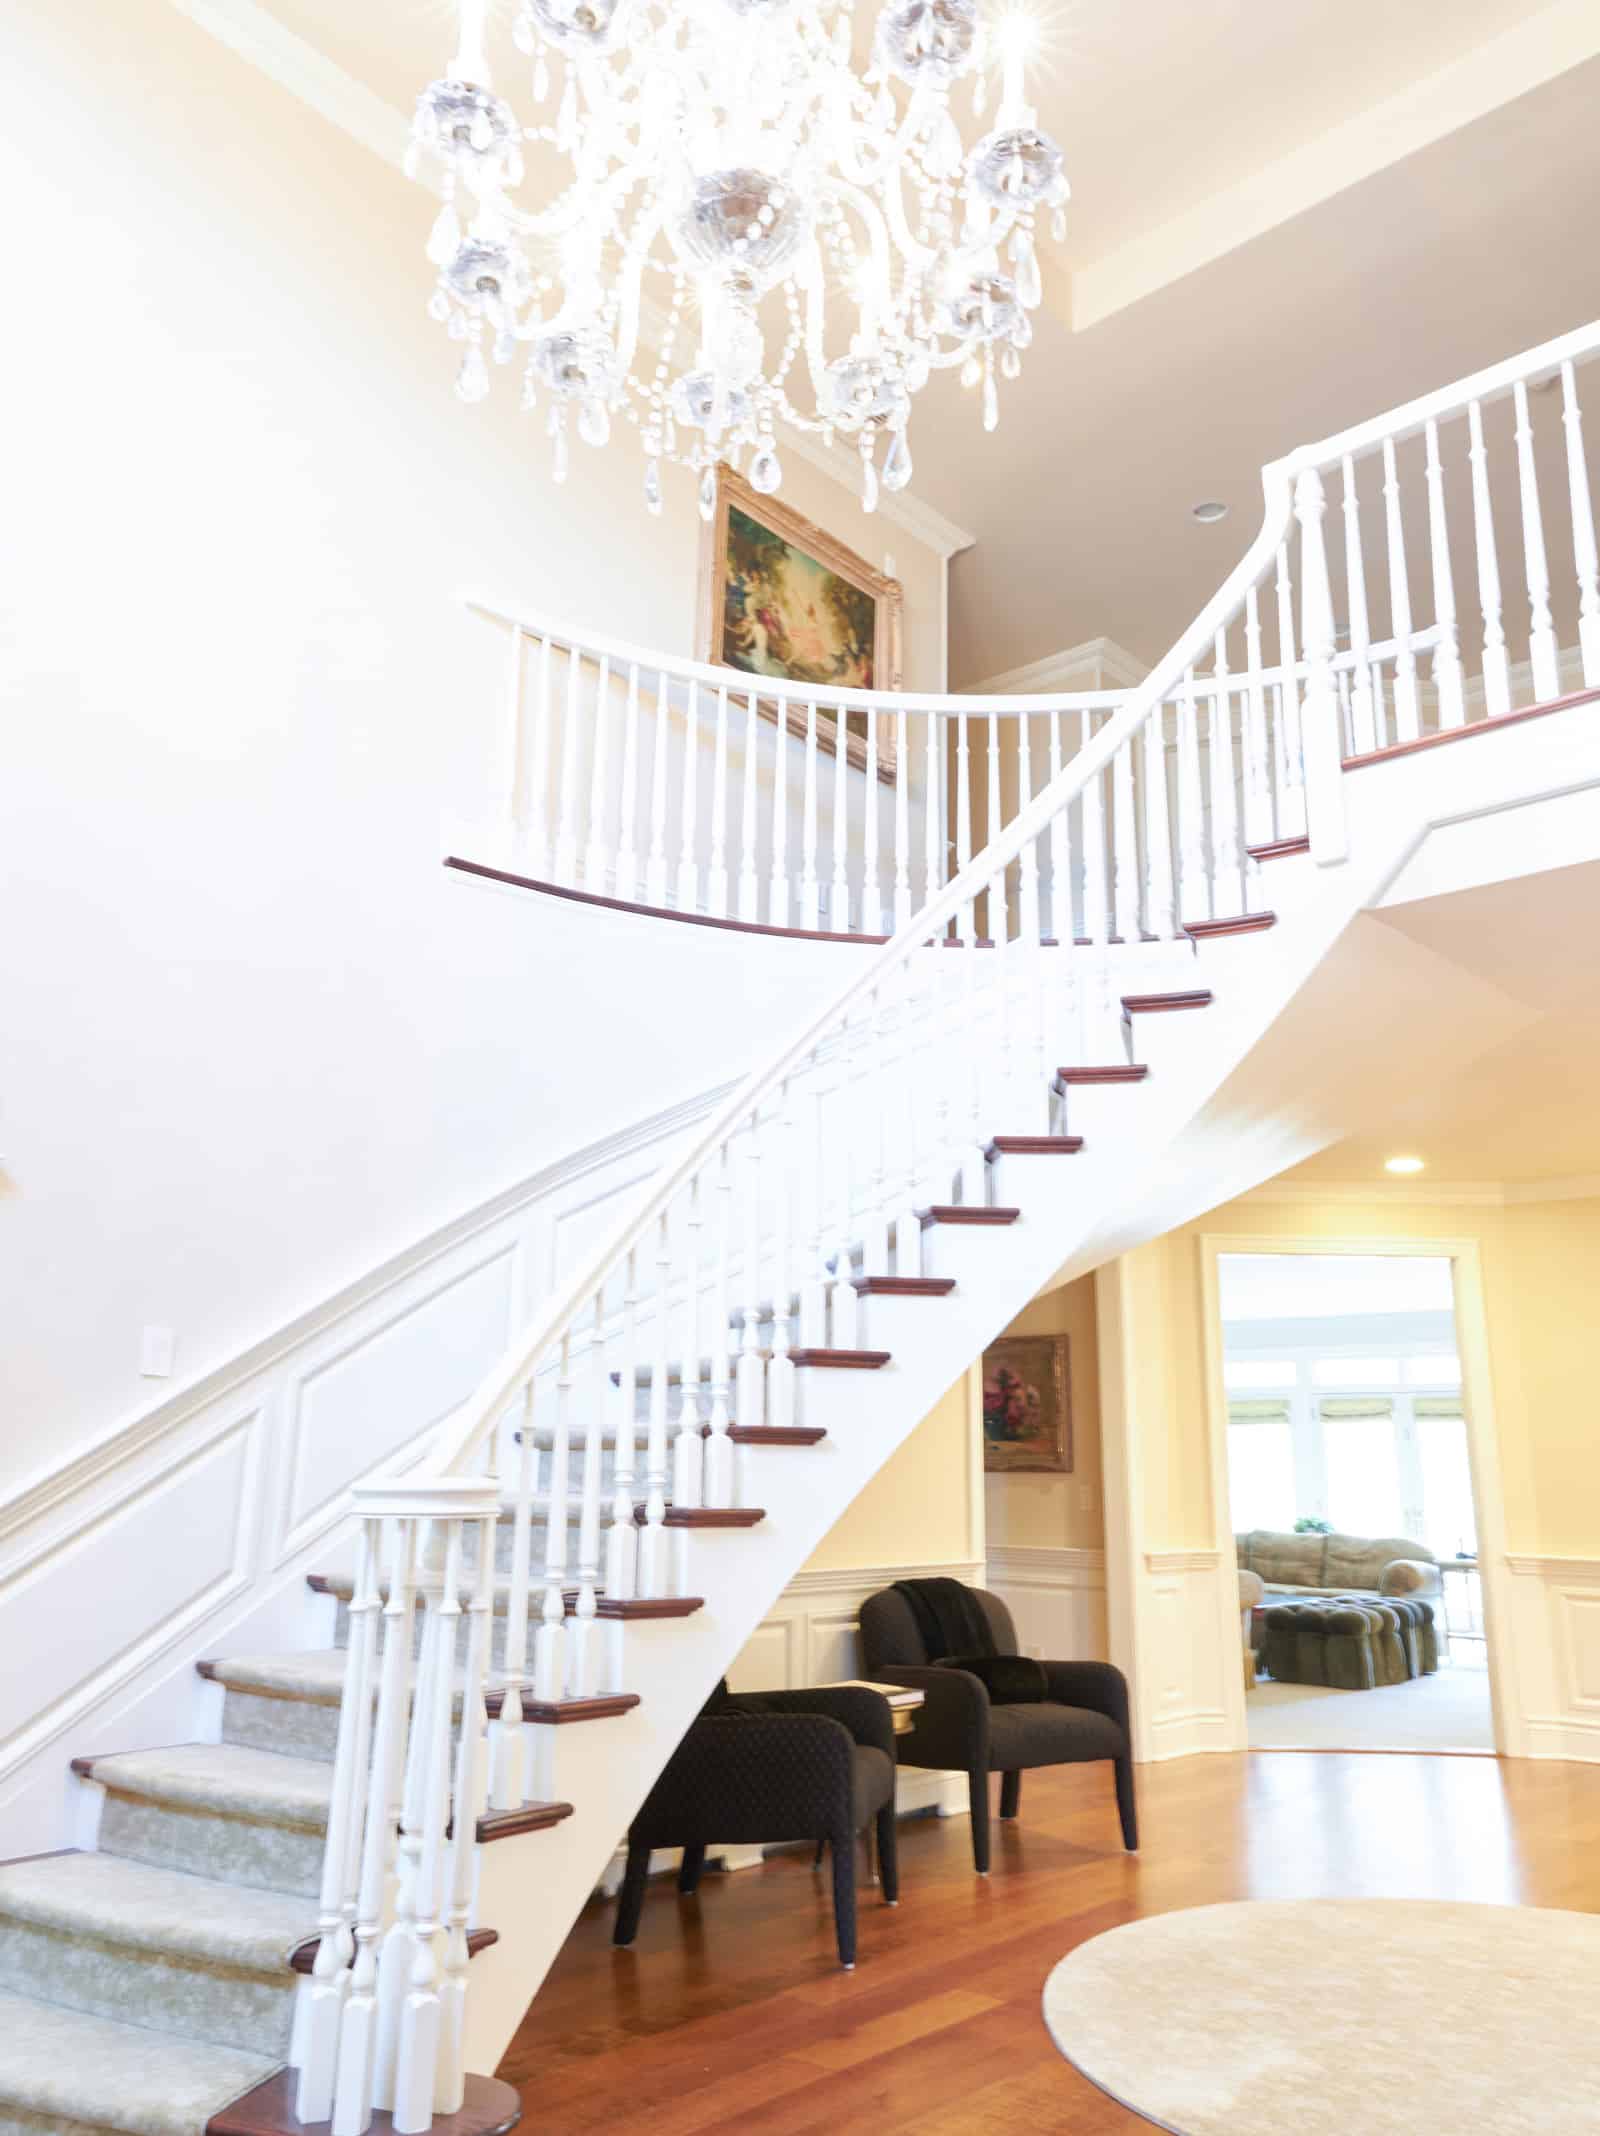 A Staircase In A House